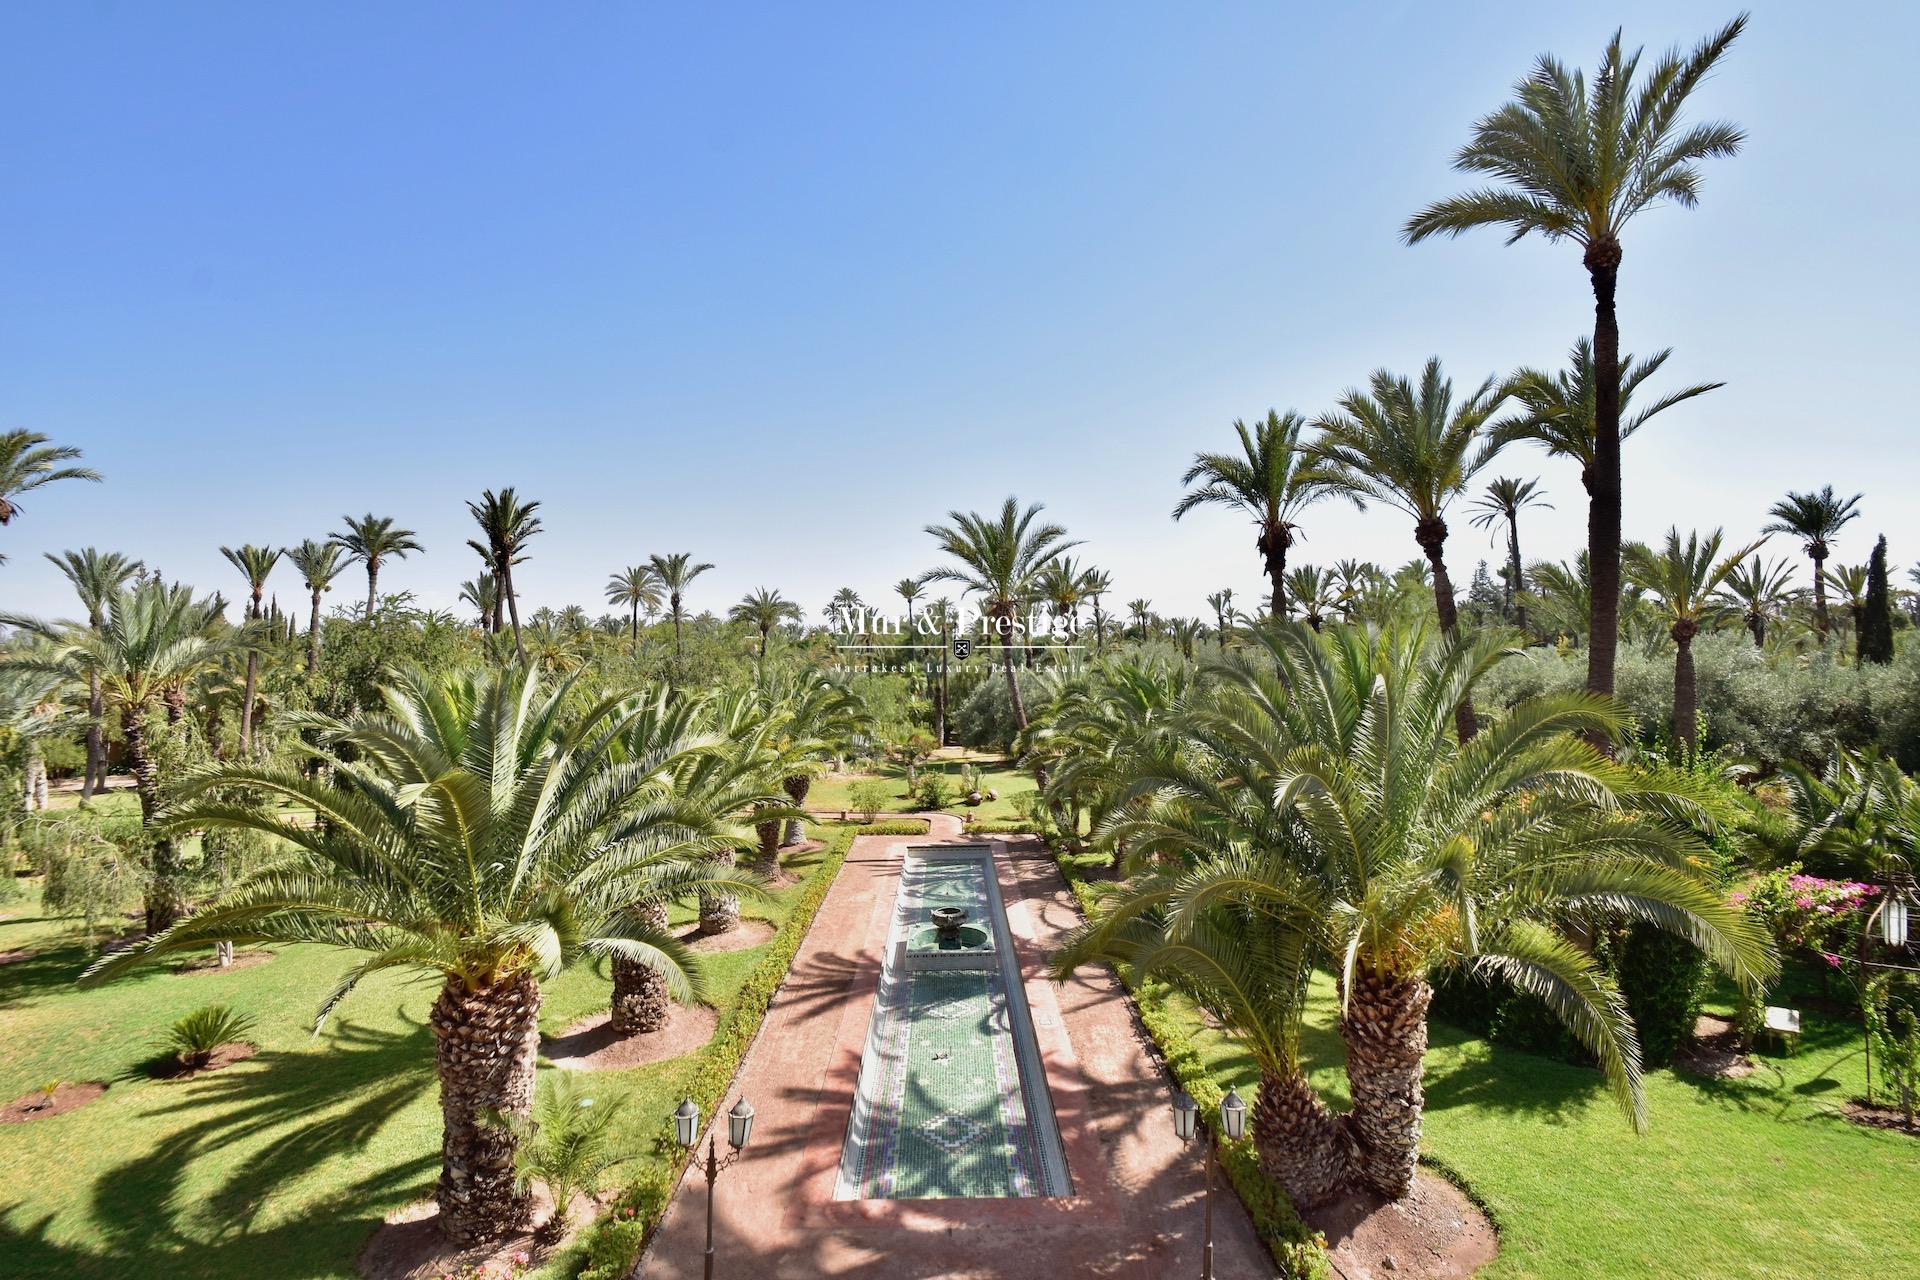 The Palmeraie of Marrakech